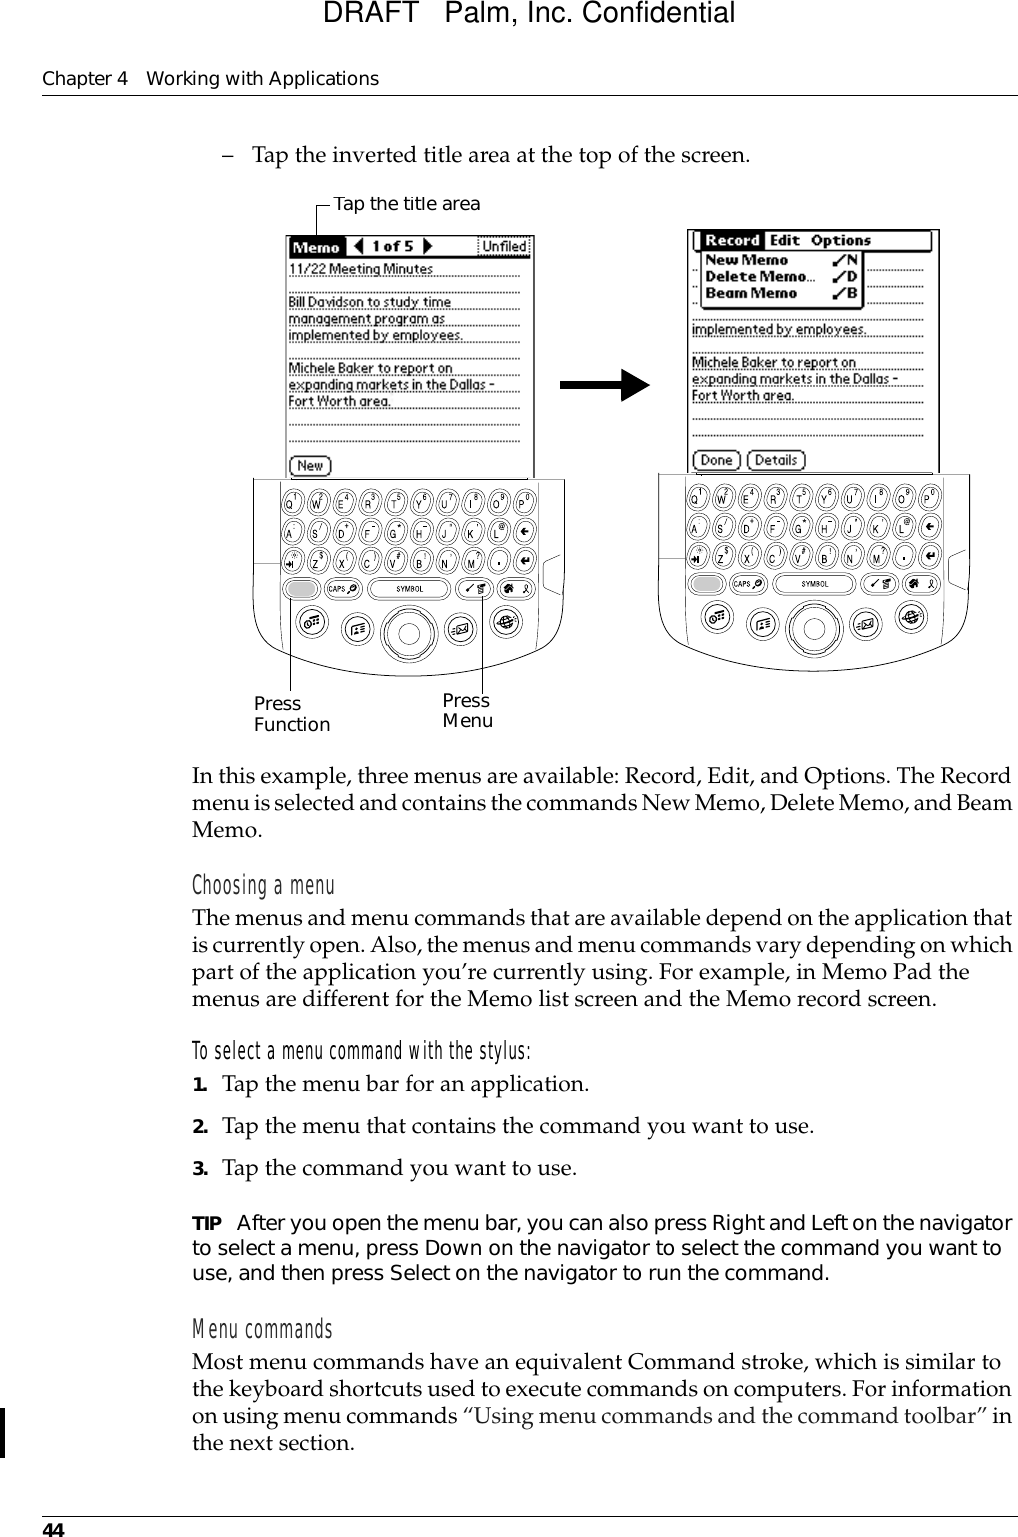 Chapter 4 Working with Applications44– Tap the inverted title area at the top of the screen.In this example, three menus are available: Record, Edit, and Options. The Record menu is selected and contains the commands New Memo, Delete Memo, and Beam Memo.Choosing a menuThe menus and menu commands that are available depend on the application that is currently open. Also, the menus and menu commands vary depending on which part of the application you’re currently using. For example, in Memo Pad the menus are different for the Memo list screen and the Memo record screen.To select a menu command with the stylus:1. Tap the menu bar for an application.2. Tap the menu that contains the command you want to use.3. Tap the command you want to use.TIP After you open the menu bar, you can also press Right and Left on the navigator to select a menu, press Down on the navigator to select the command you want to use, and then press Select on the navigator to run the command.Menu commandsMost menu commands have an equivalent Command stroke, which is similar to the keyboard shortcuts used to execute commands on computers. For information on using menu commands “Using menu commands and the command toolbar” in the next section.Press Function Tap the title areaPress MenuDRAFT   Palm, Inc. Confidential